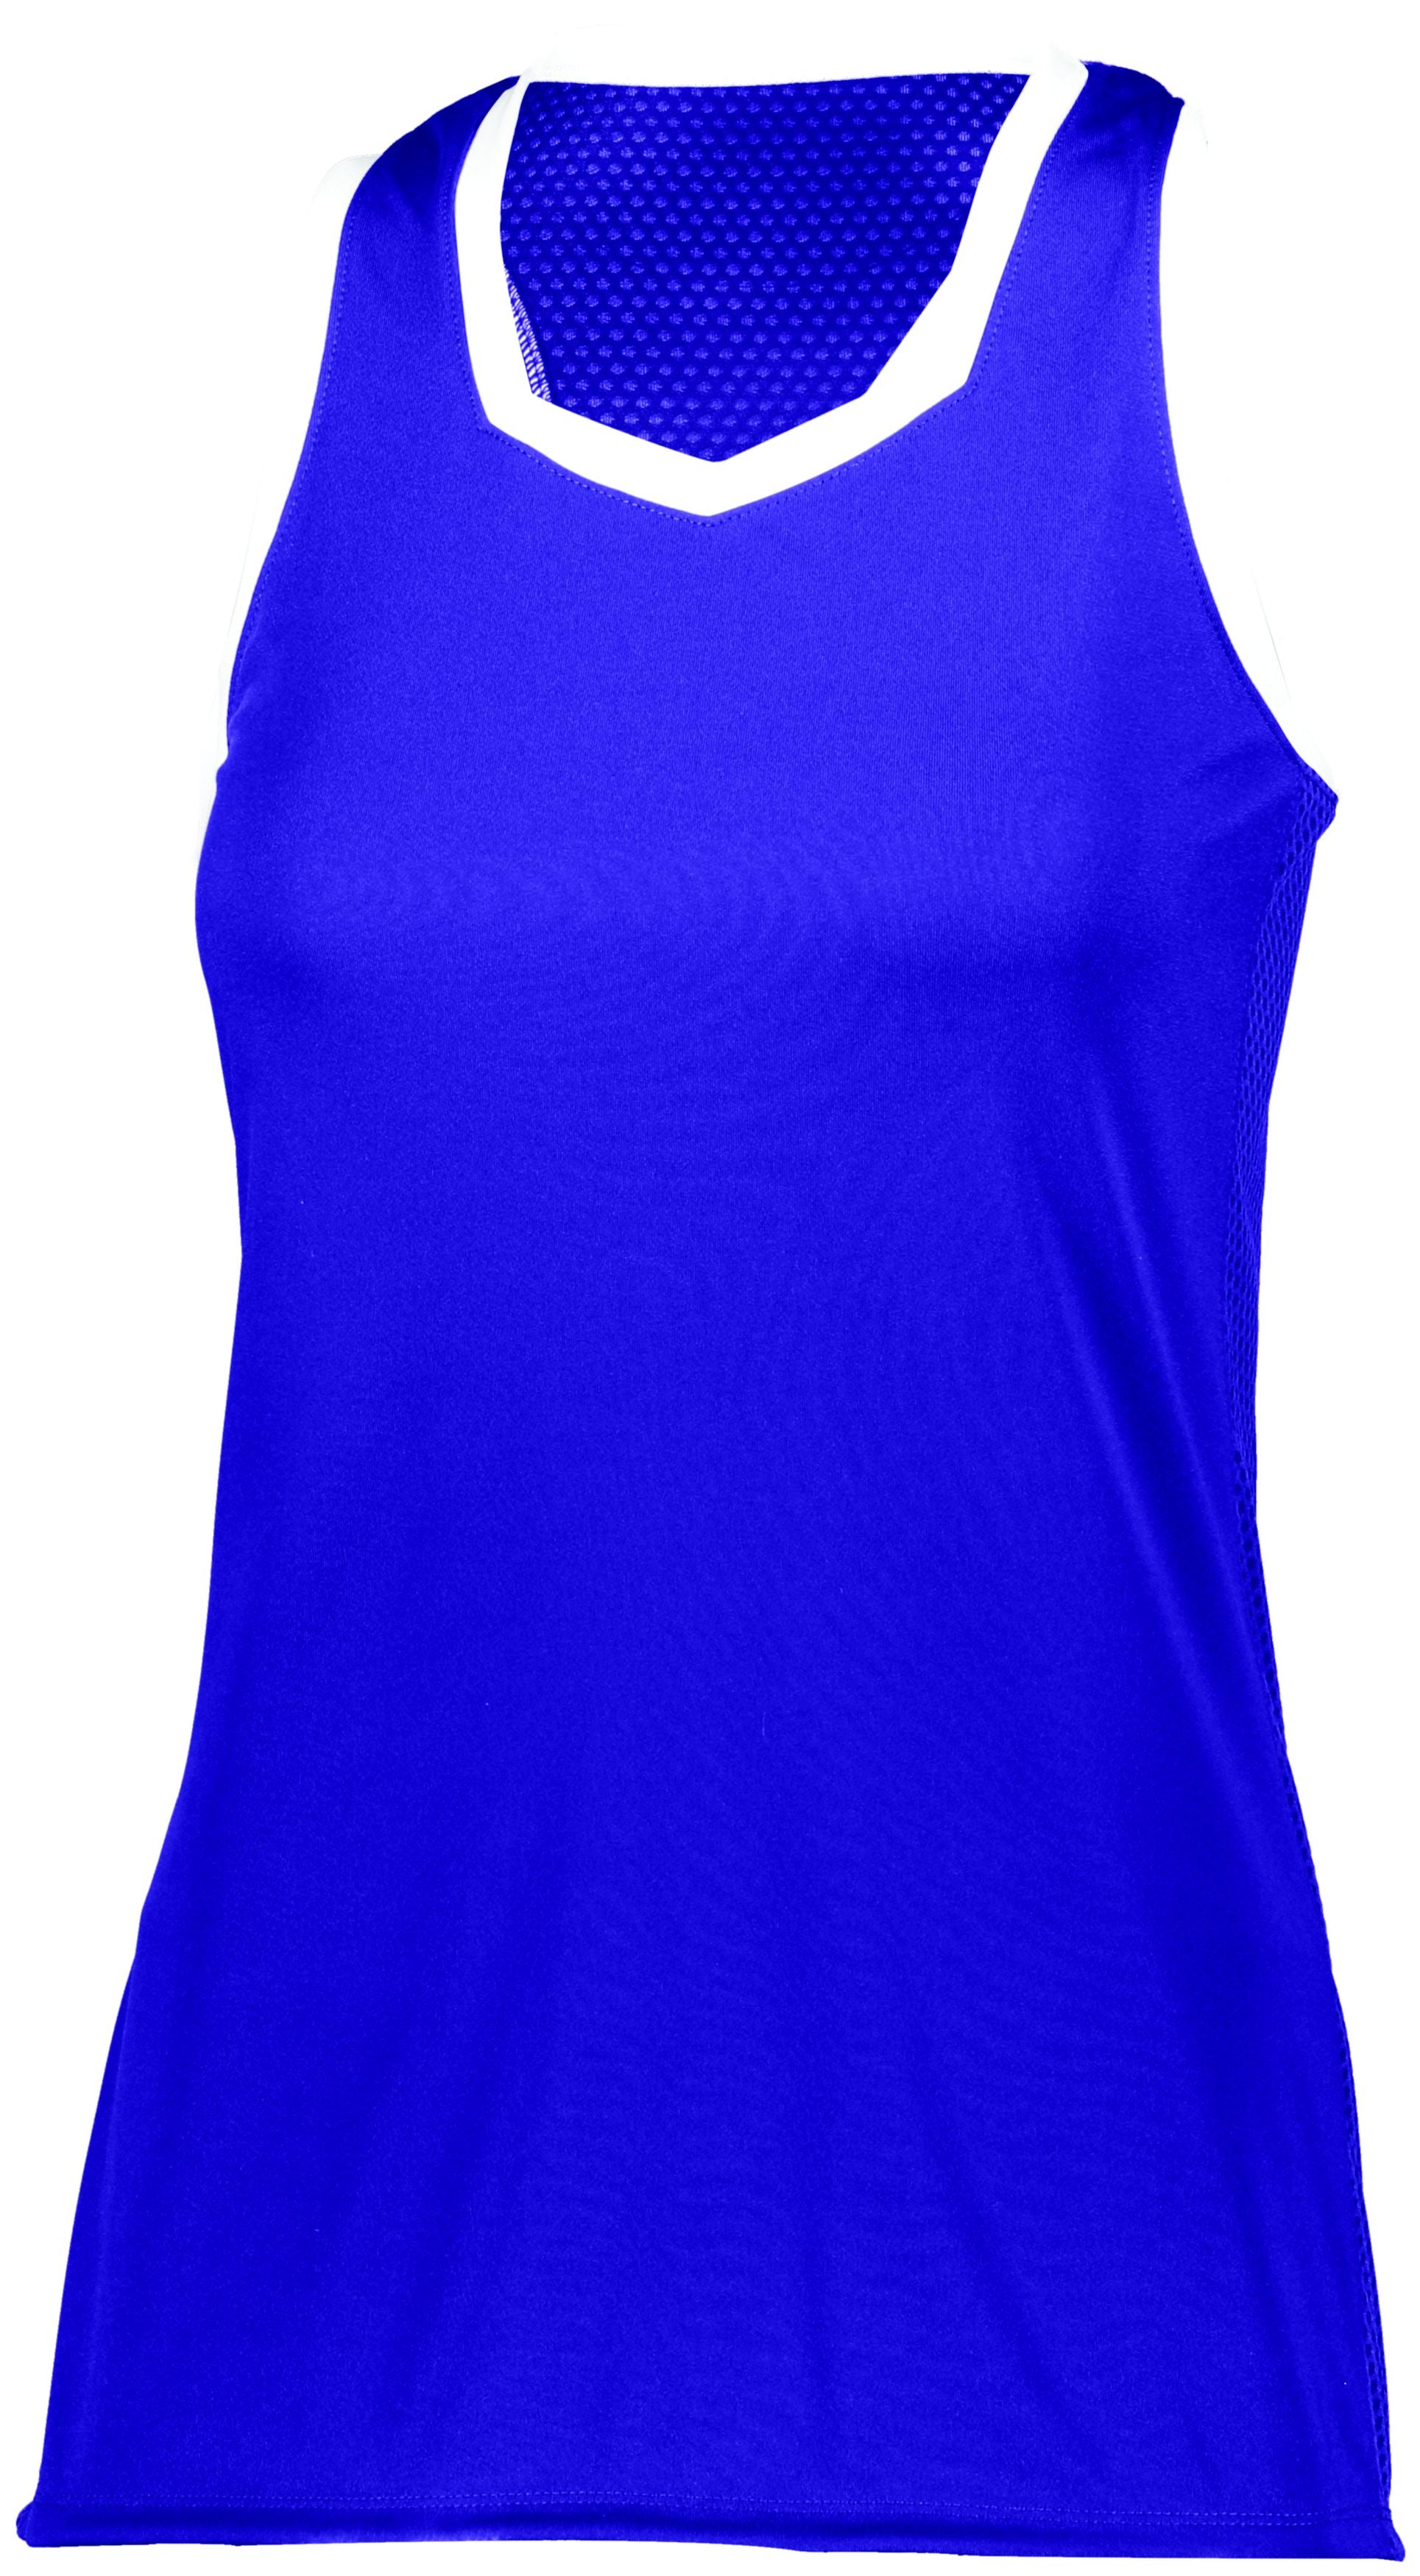 Augusta Sportswear Ladies Crosse Jersey in Purple/White  -Part of the Ladies, Ladies-Jersey, Augusta-Products, Shirts product lines at KanaleyCreations.com